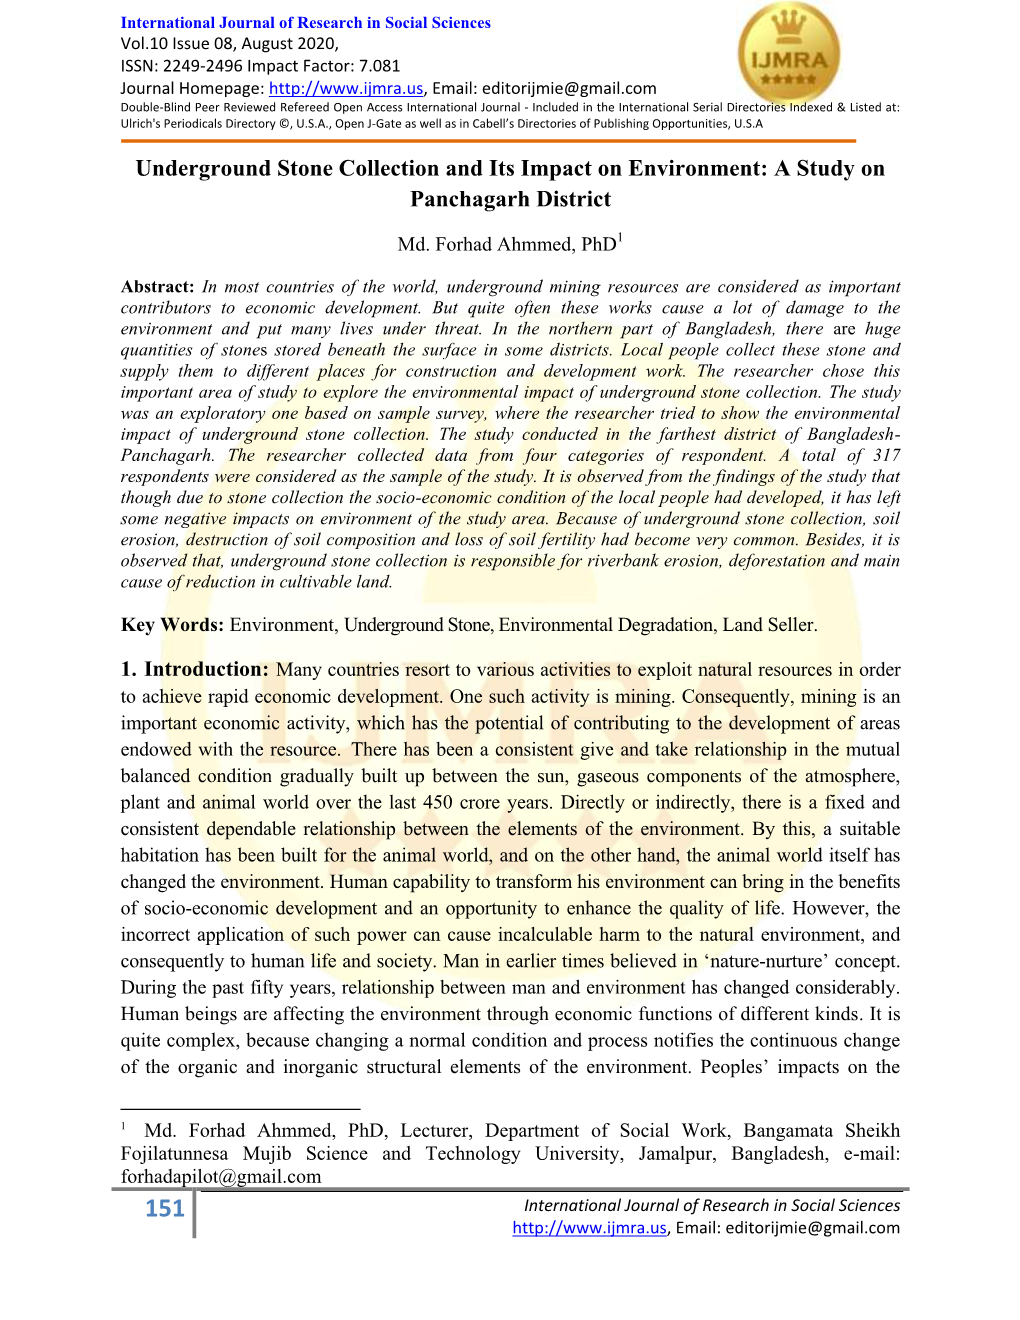 Underground Stone Collection and Its Impact on Environment: a Study on Panchagarh District